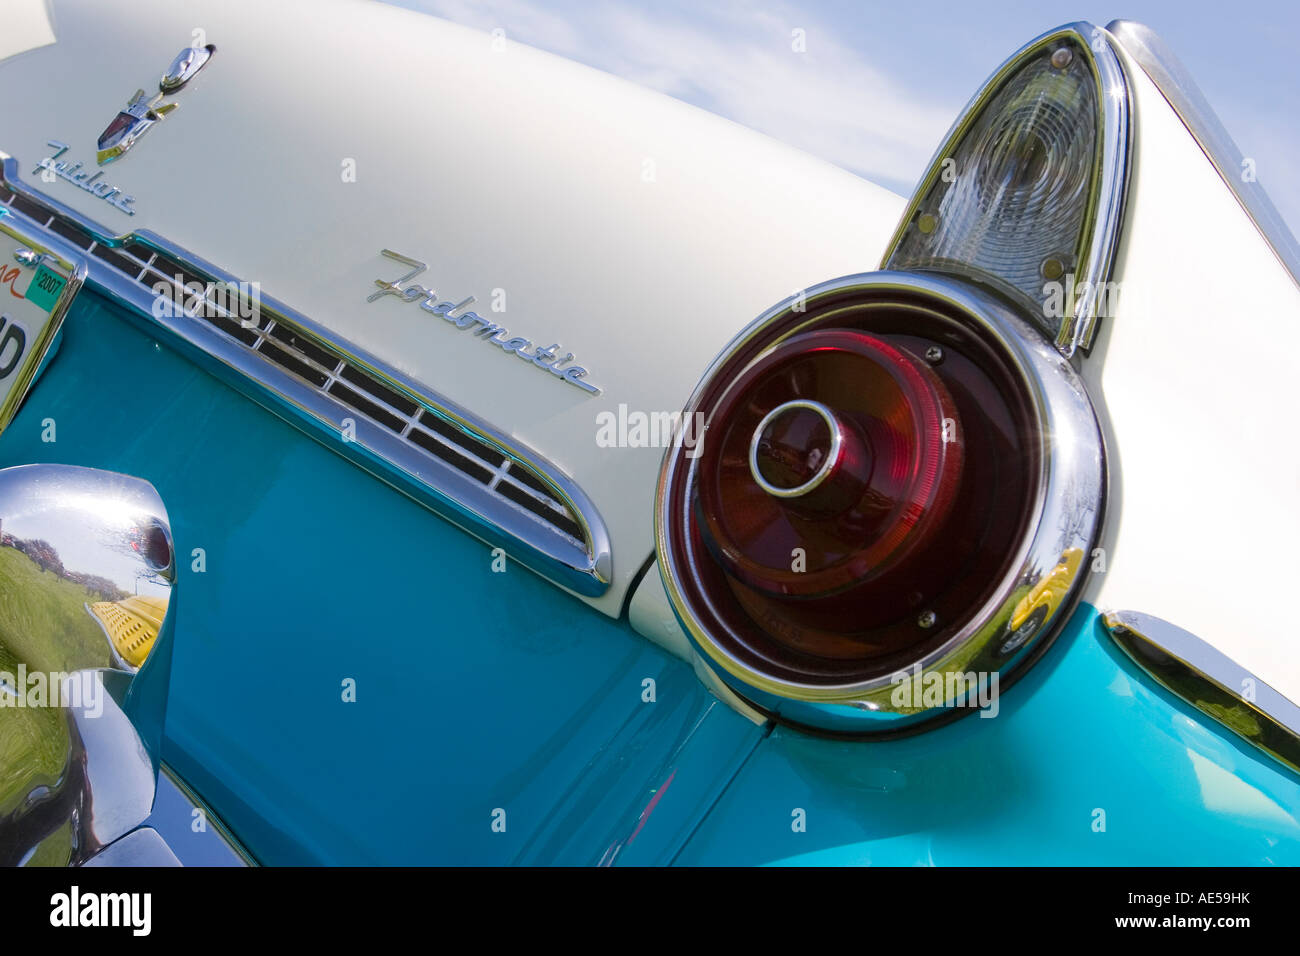 Rear fender fins tail light and emblems on a turquoise and white 1955 Ford Fairlane convertible classic car Stock Photo